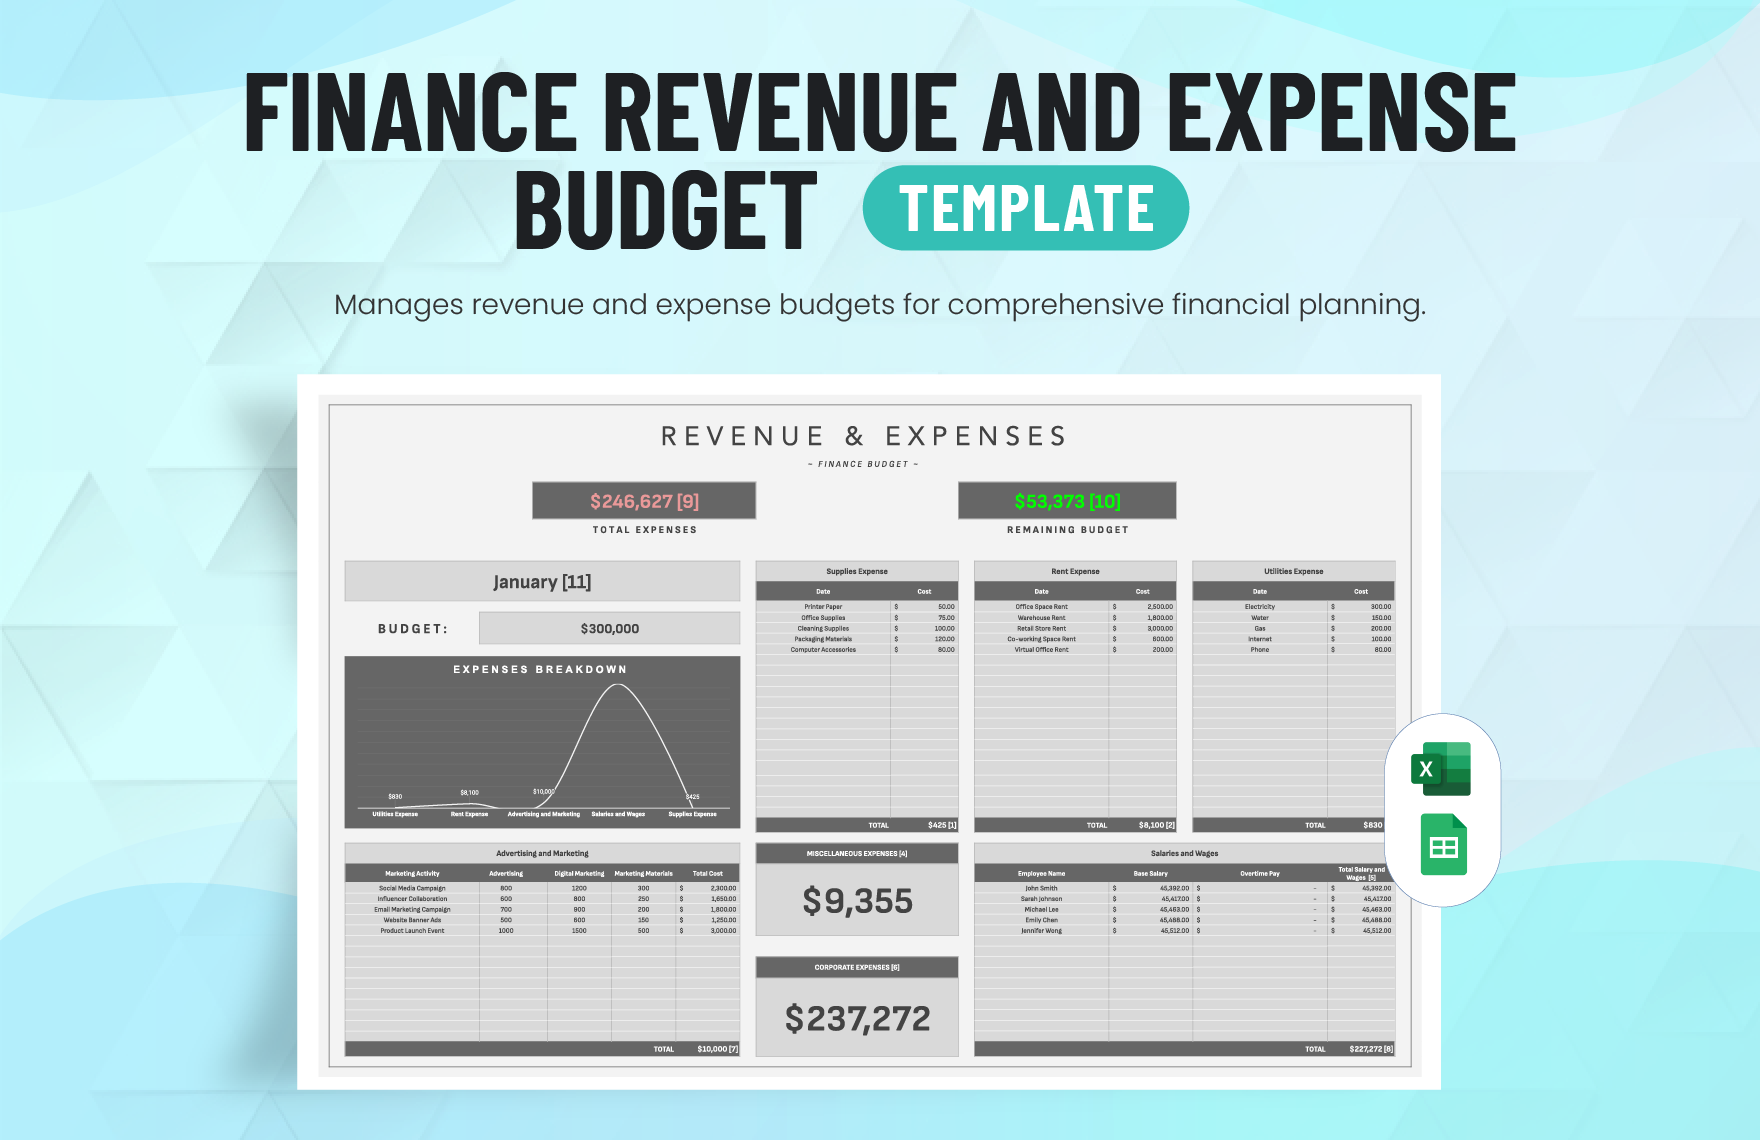 Finance Revenue and Expense Budget Template